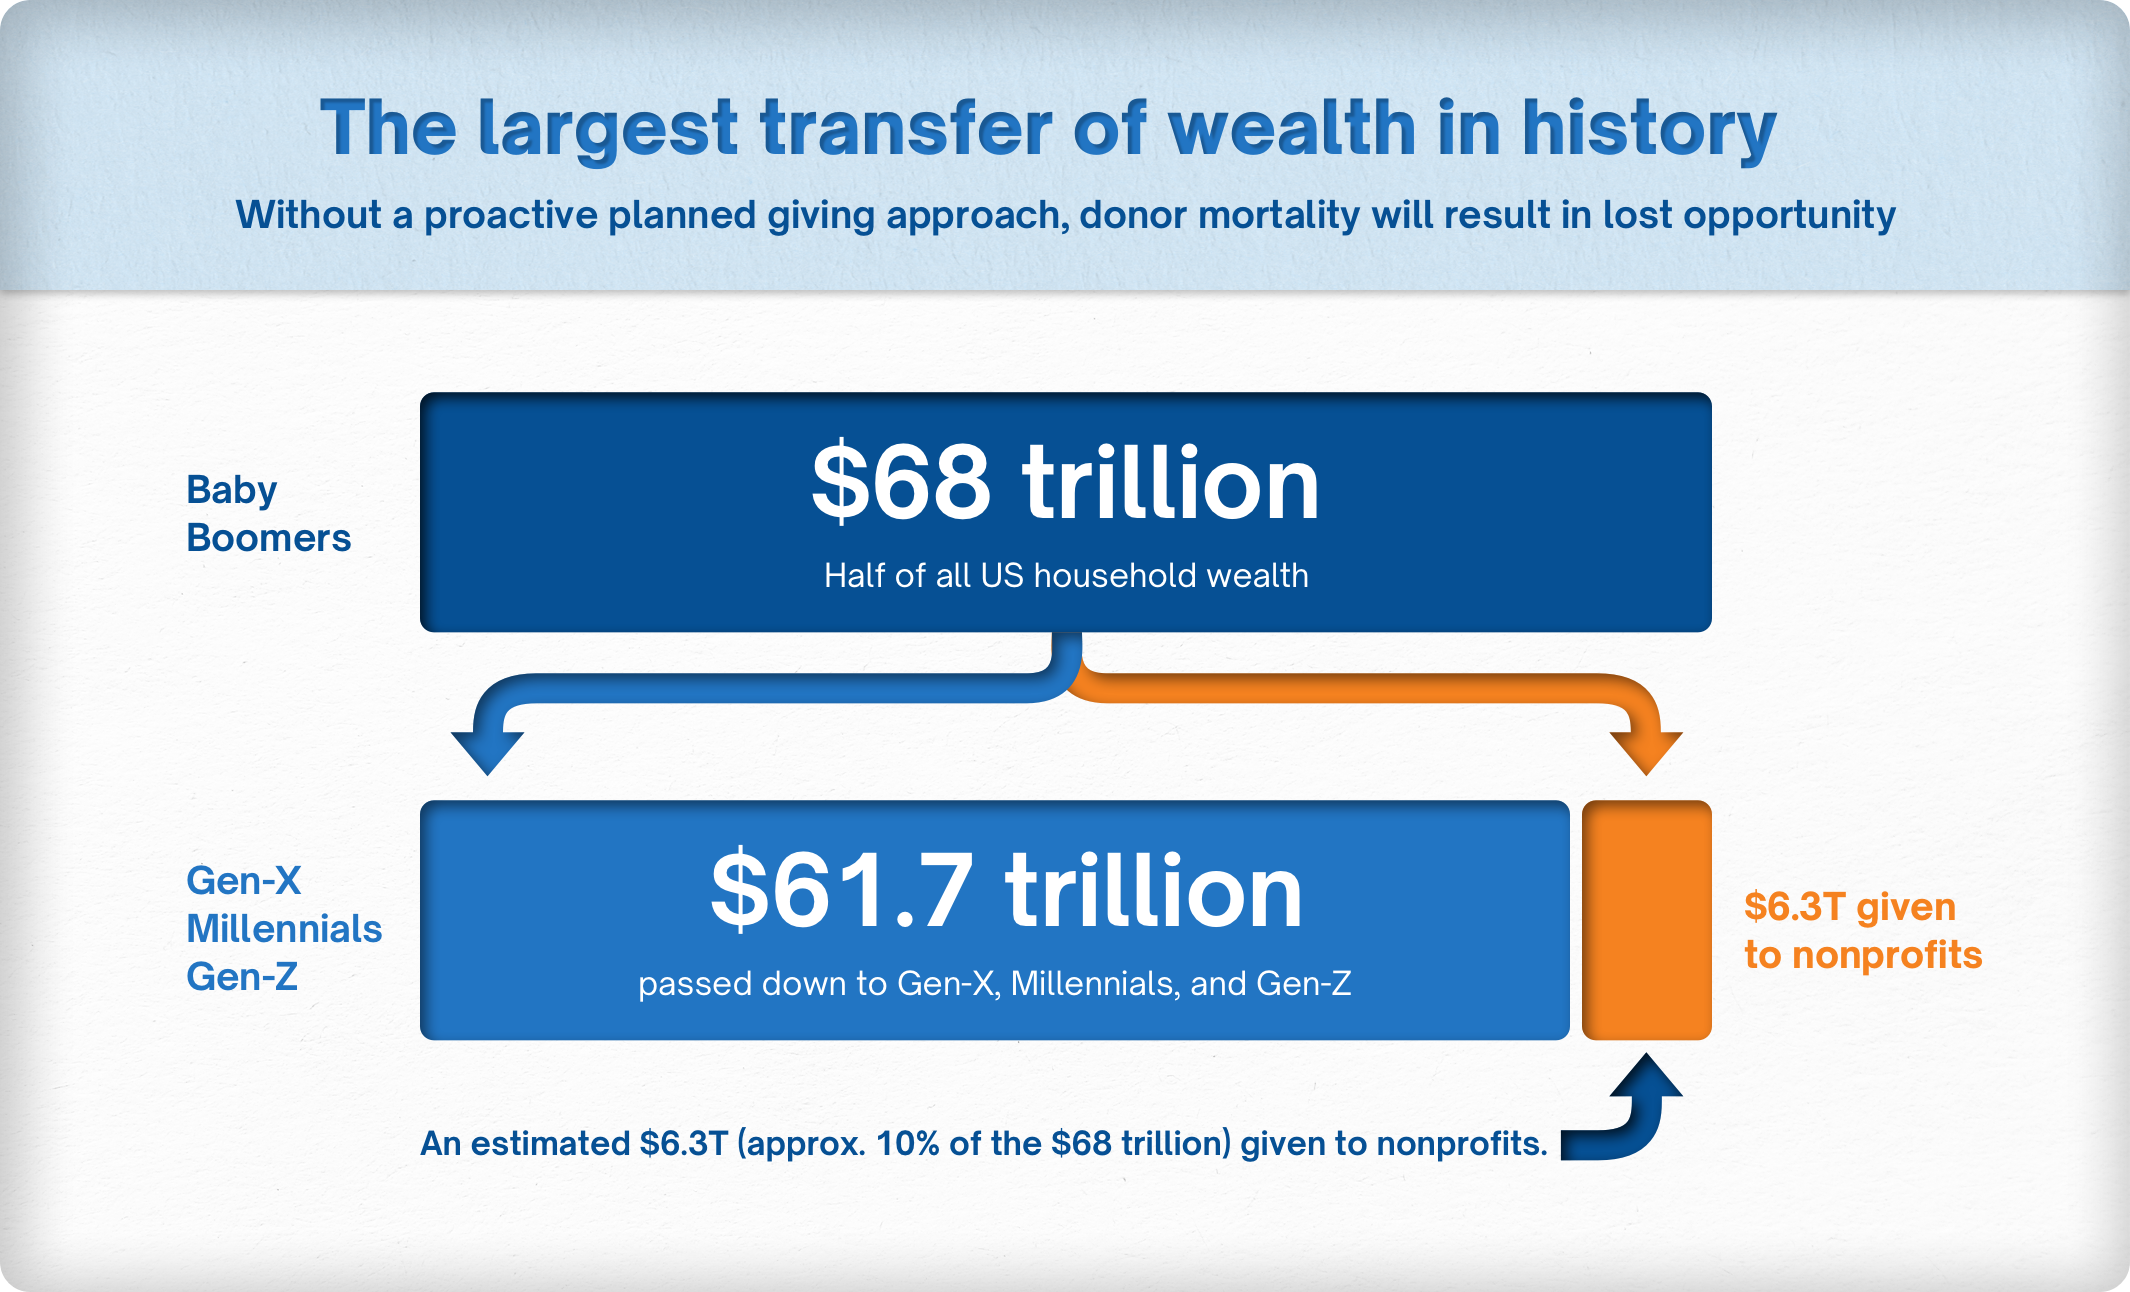 The largest wealth transfer in history